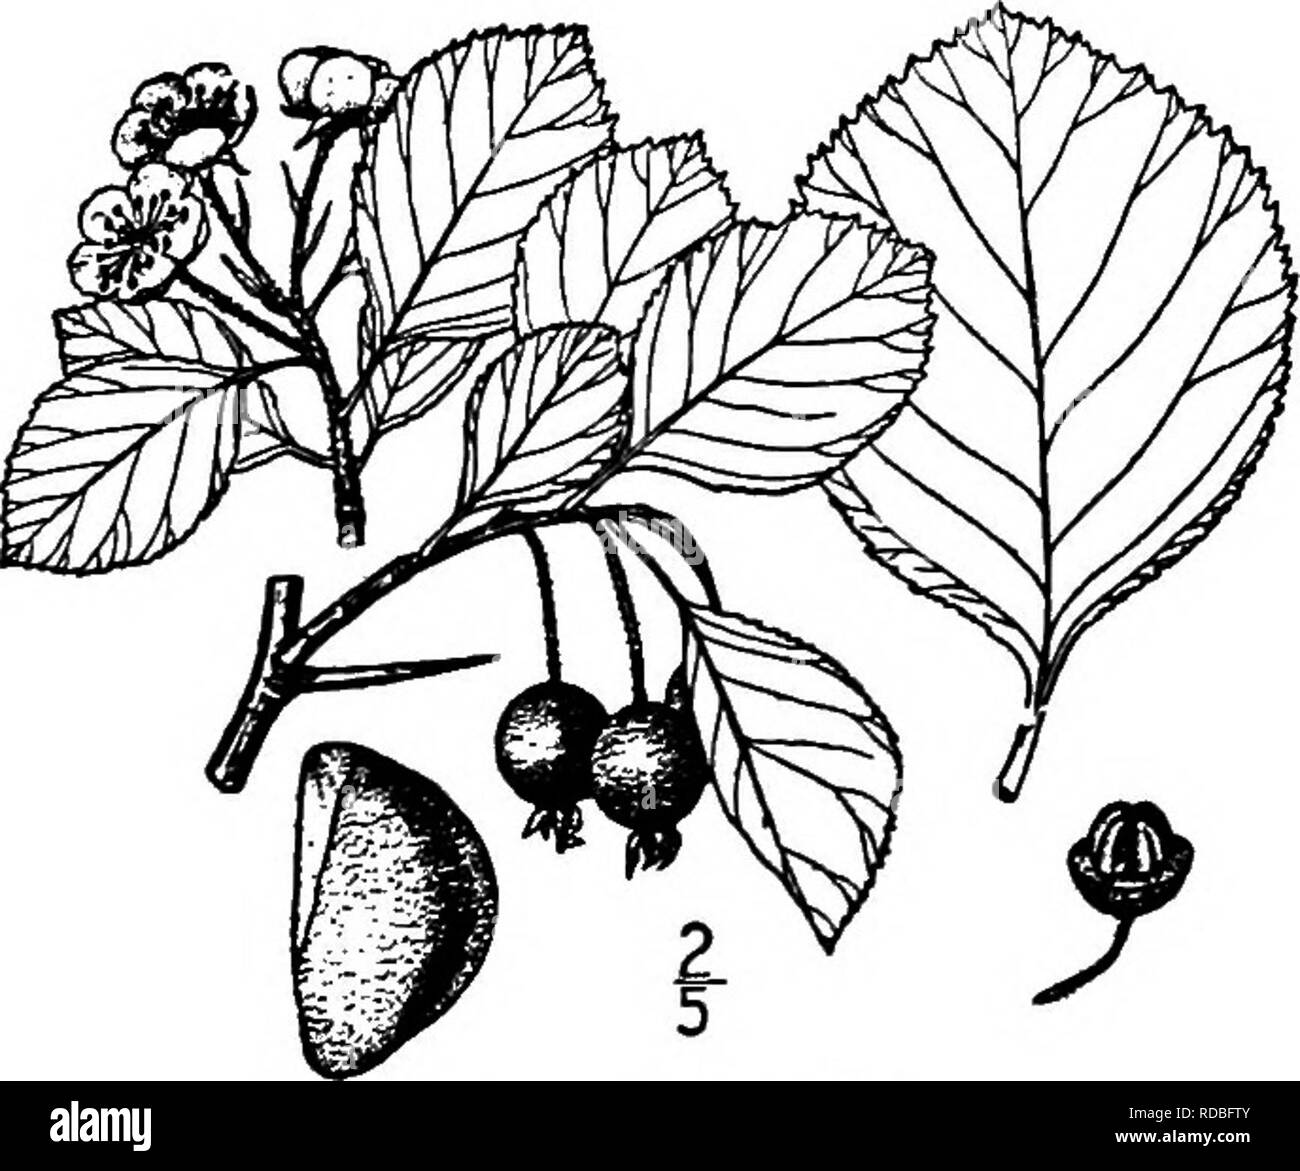 . North American trees : being descriptions and illustrations of the trees growing independently of cultivation in North America, north of Mexico and the West Indies . Trees. 22. ASHE'S THORN — Crataegus Ashei Beadle Ashe's thom is known in the clay soils about Montgomery, Alabama. It is a tree sometimes 6 meters high, with ascending branches forming an oval top; the bark is hght gray or red-brown, be- coming scaly with age; the twigs are orange-brown or reddish brown, hairy, becoming hght gray, smooth, and pro- vided with slender, nearly straight spines 3 to 4 cm. long. The leaves are oblong- Stock Photo